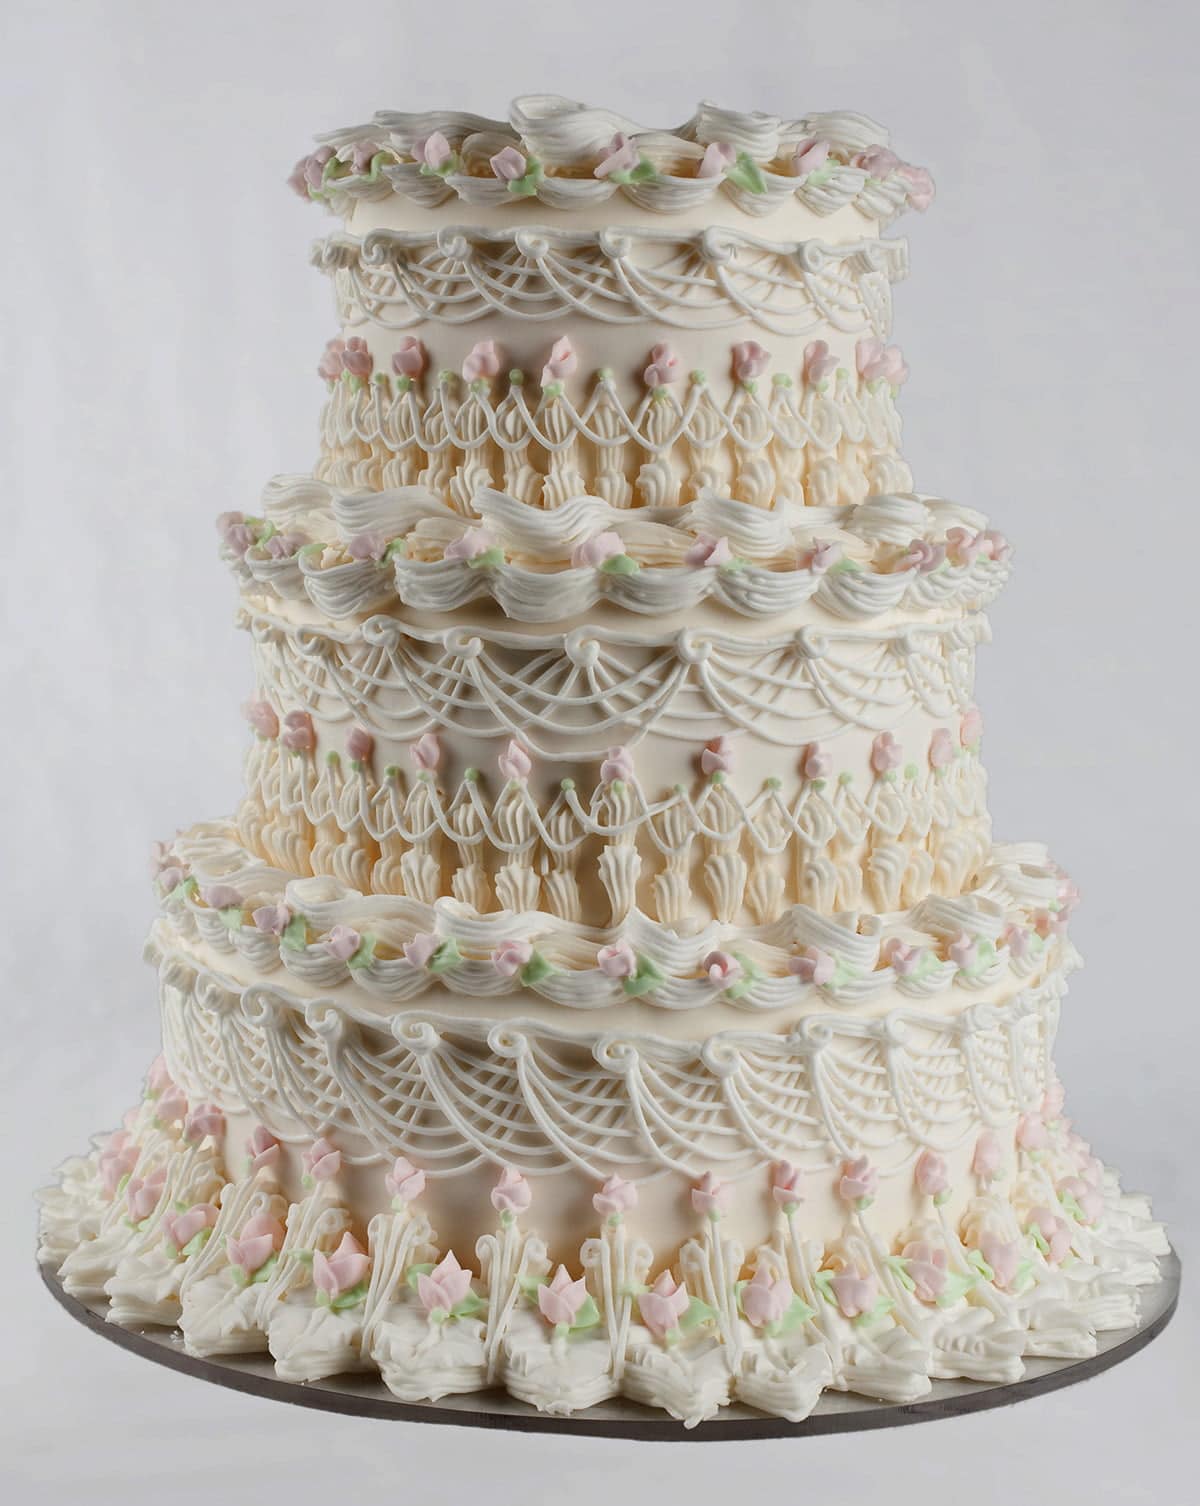 An ornately piped wedding cake, done in the lambeth style. Each layer is adorned with many layers of piping, overpiping, swags, scallops, and more. The cake is mostly white, with pale pink and green accents in the form of rosebuds.